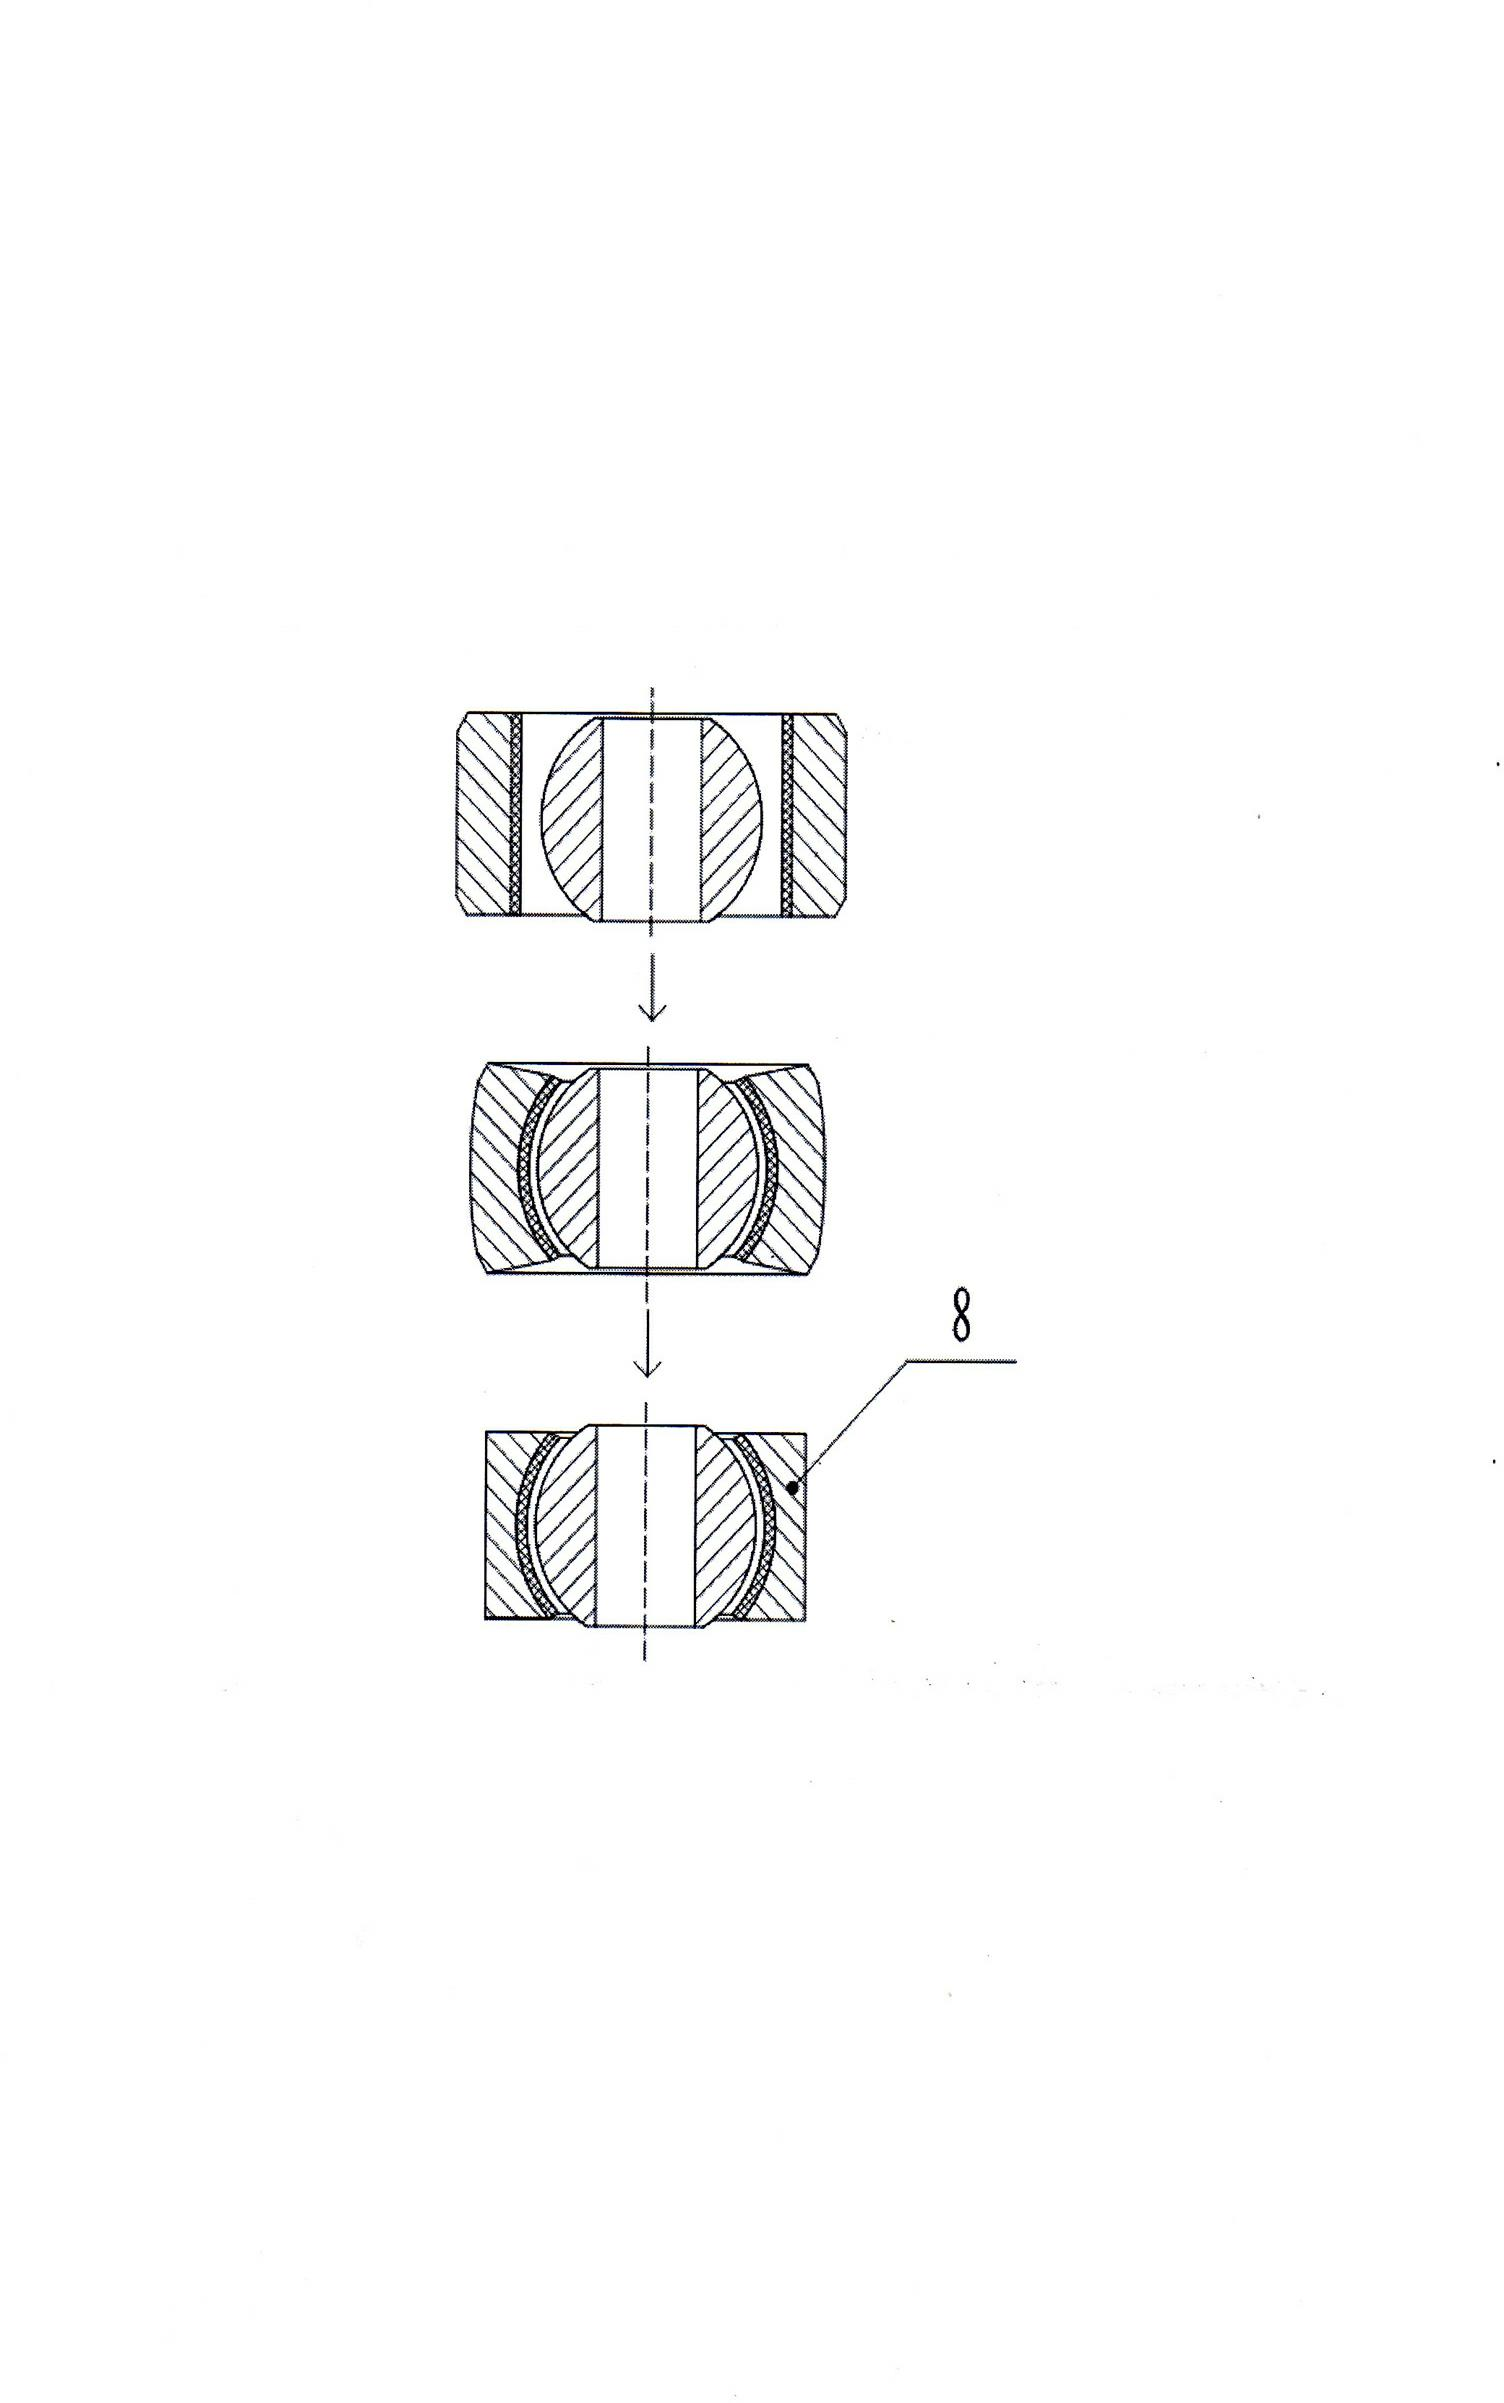 Compression molding method without action of inner rings for integral self-lubricating joint bearings